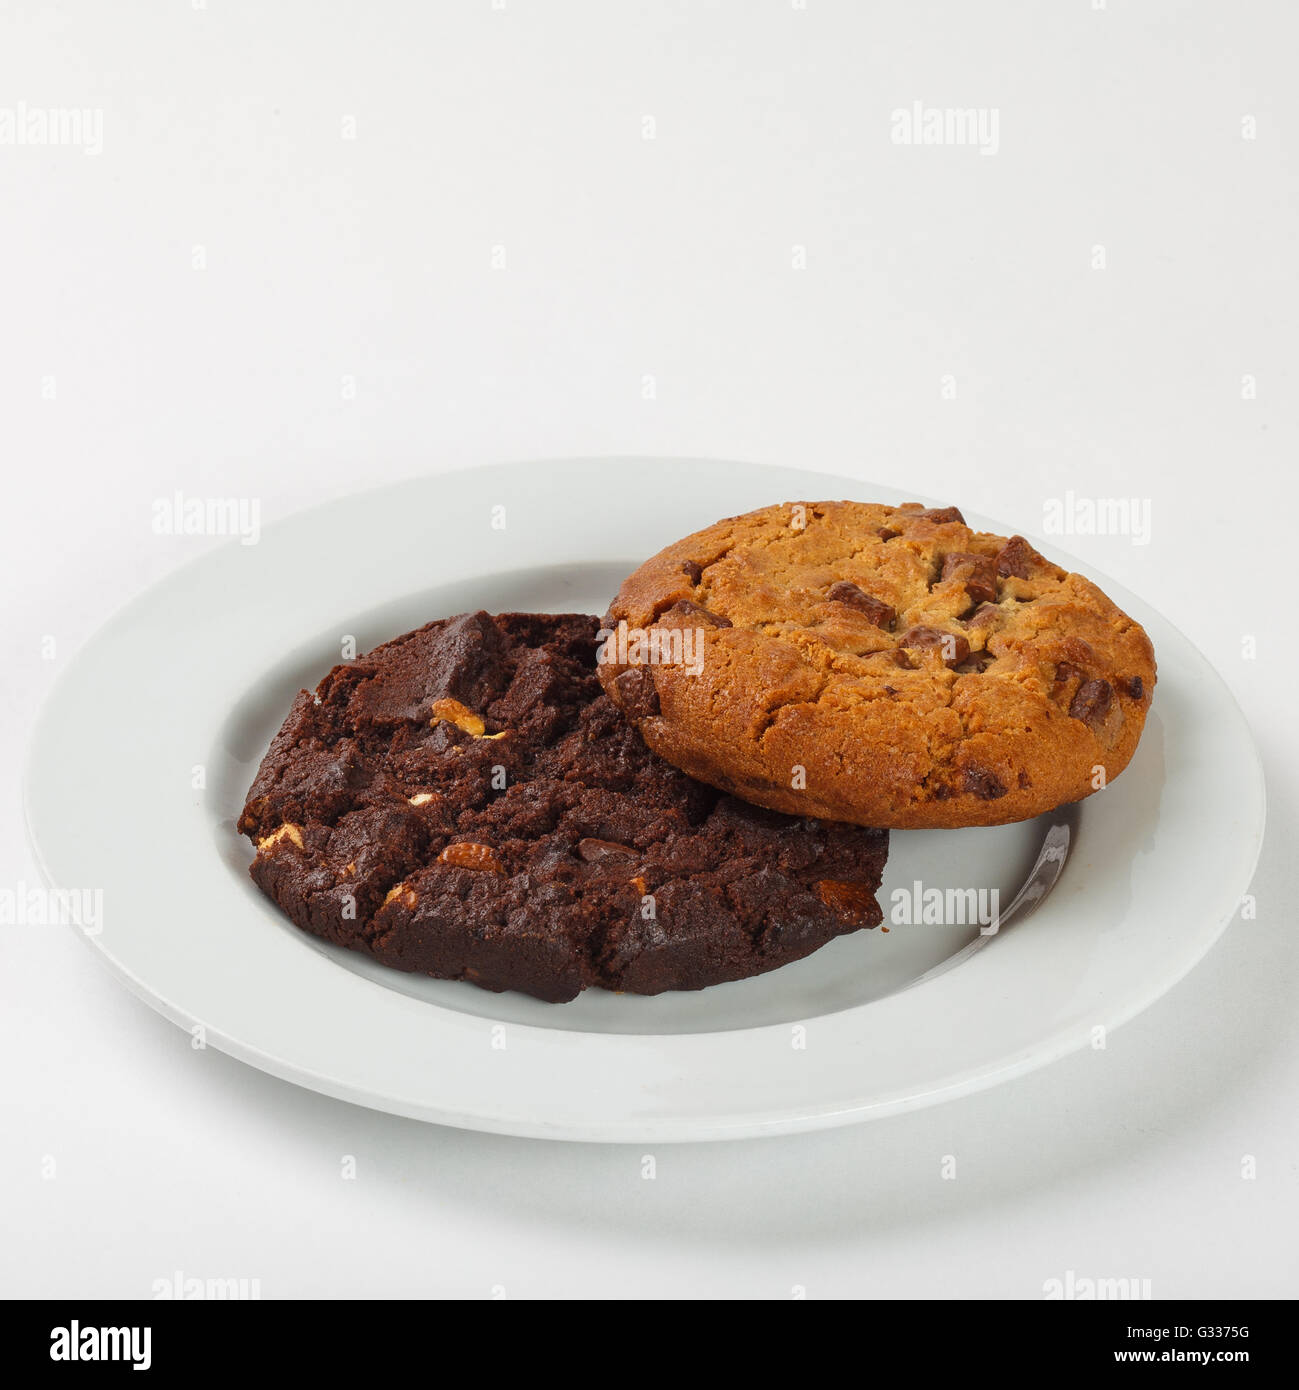 Delicious biscuit cookies with chocolate chips on the plate on white background. Close up side view. Stock Photo